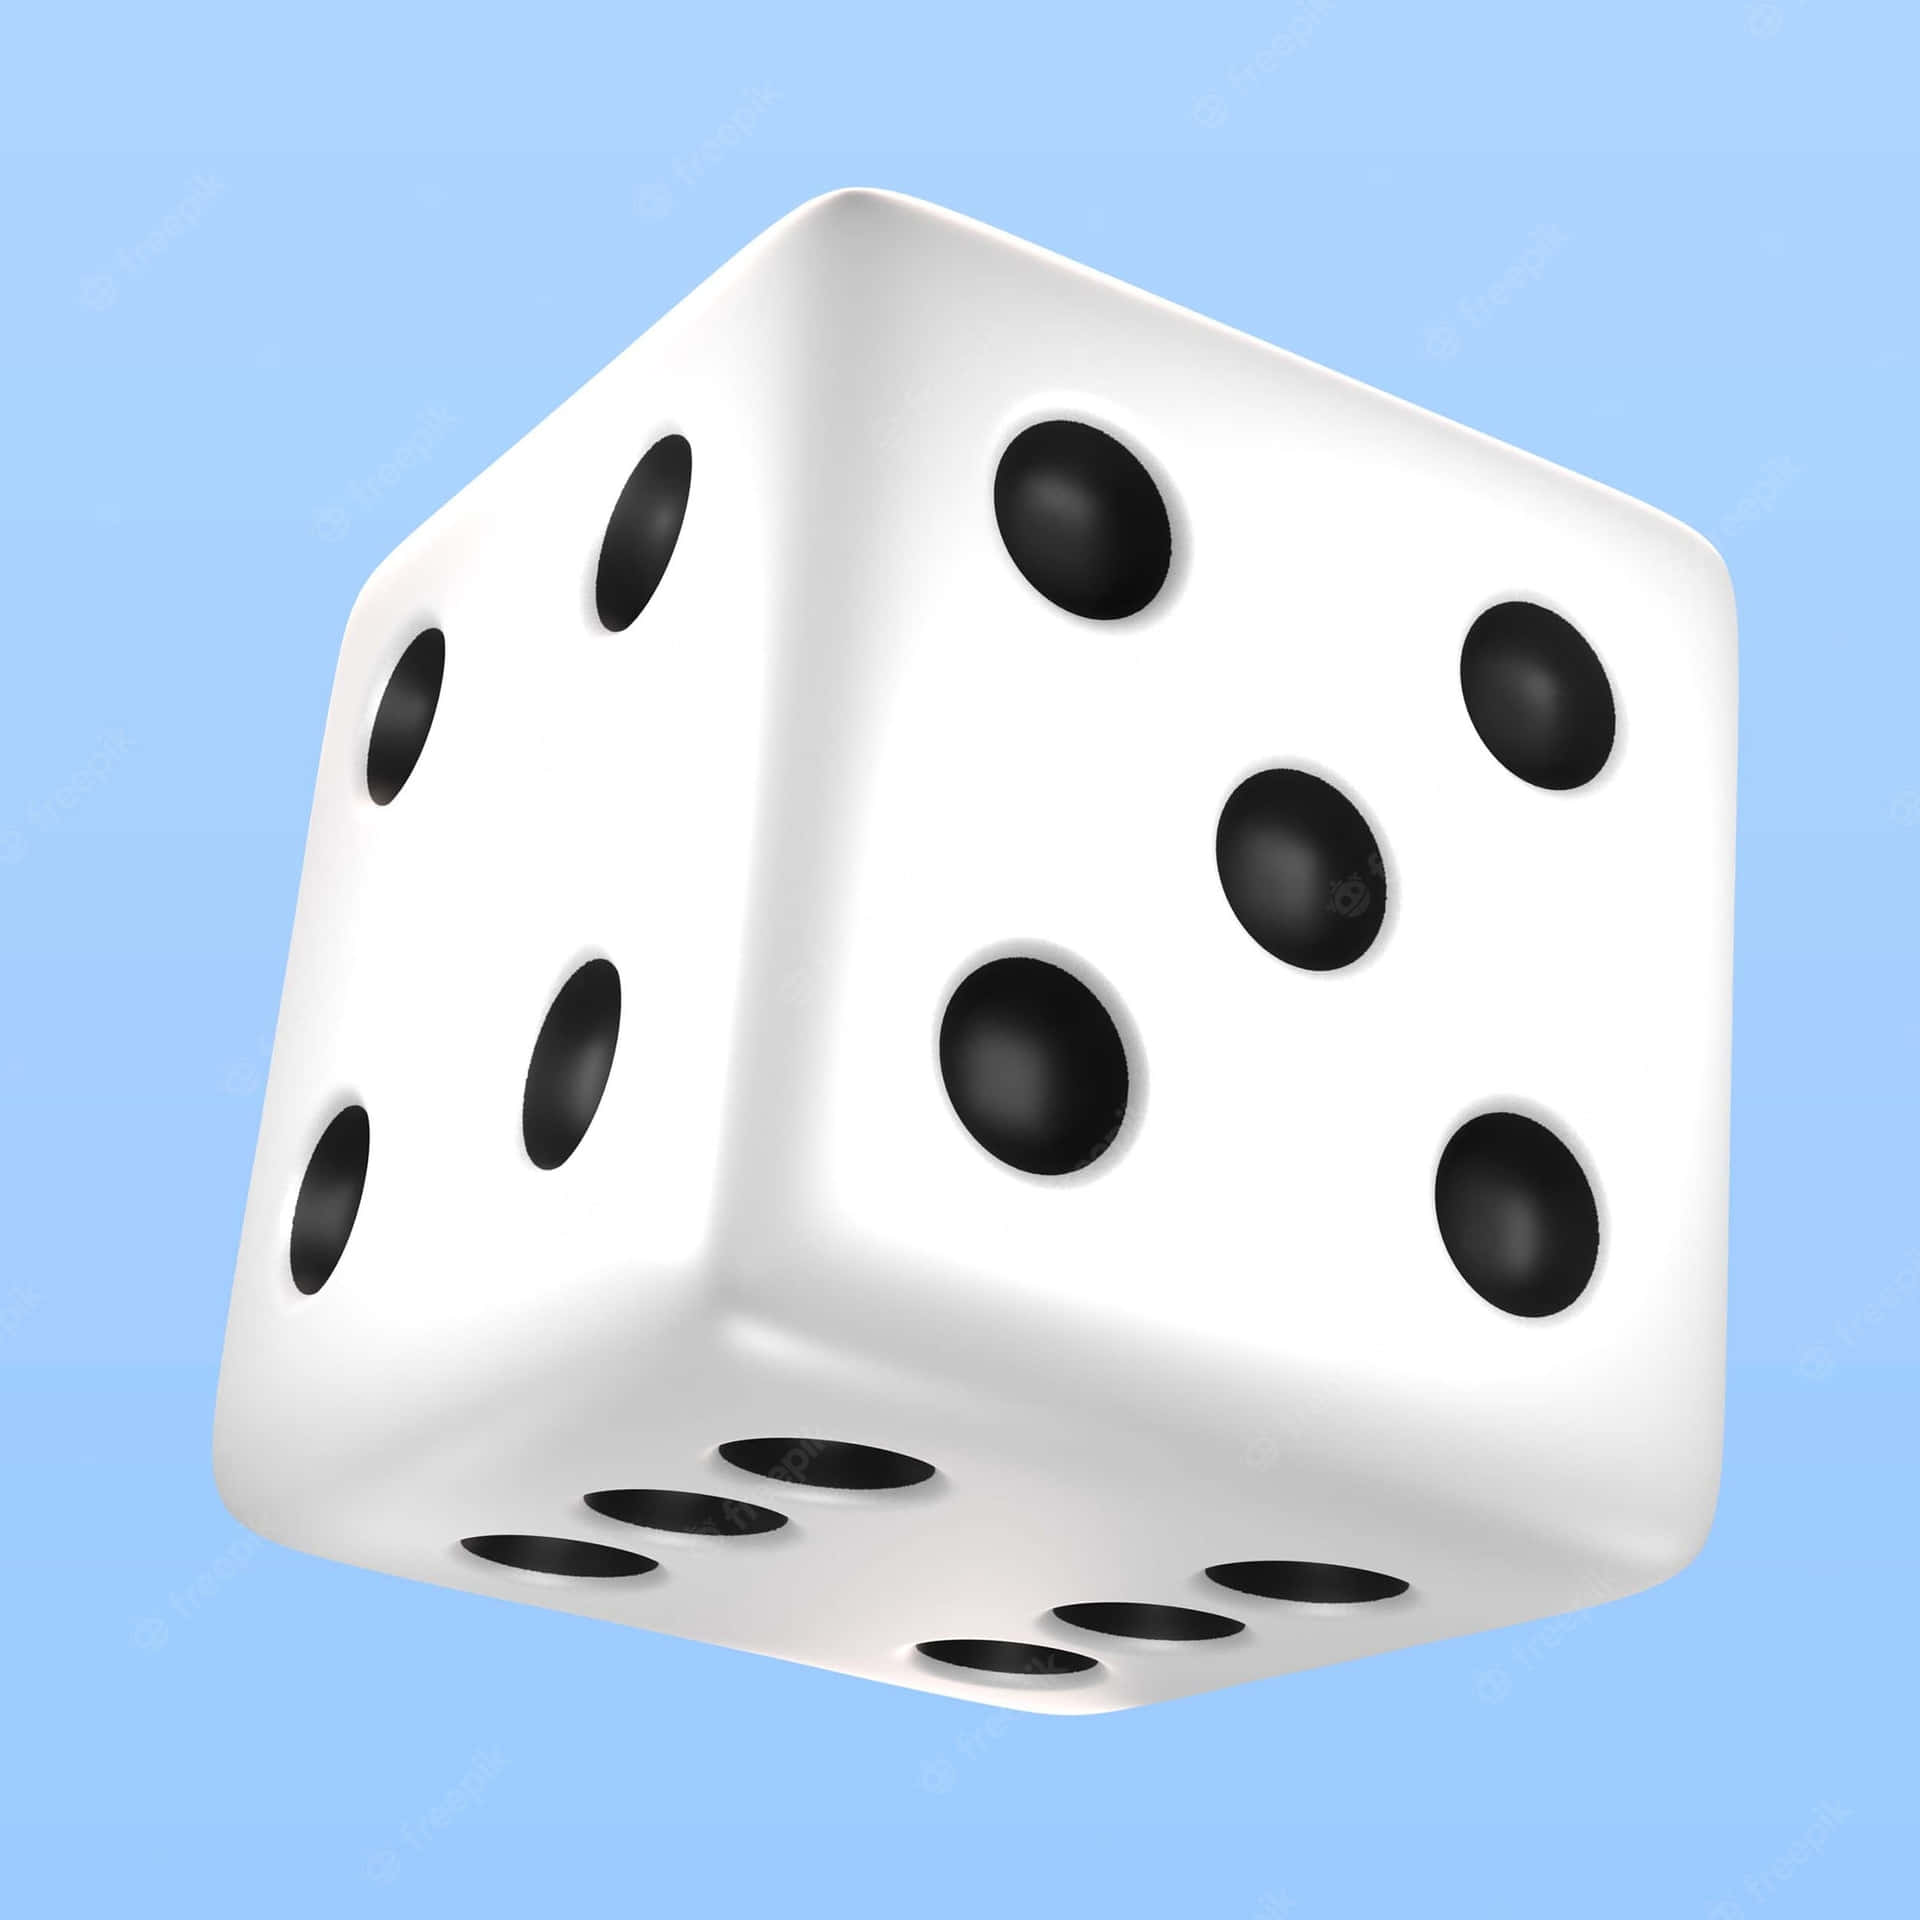 A White Dice With Black Dots On It